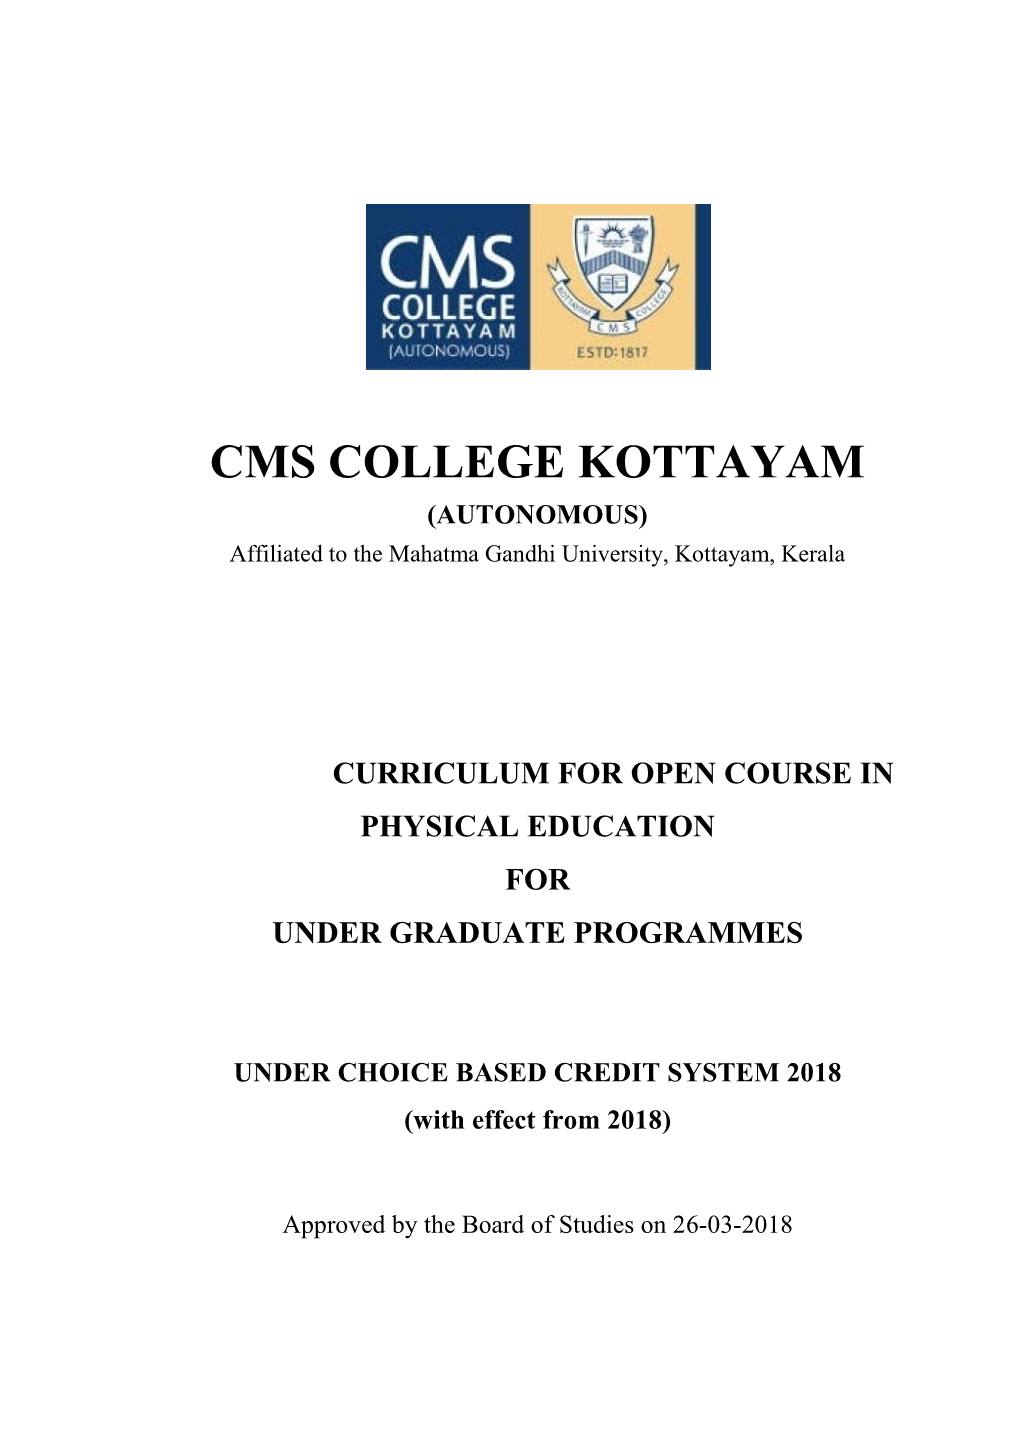 Physical Education (Open Course)